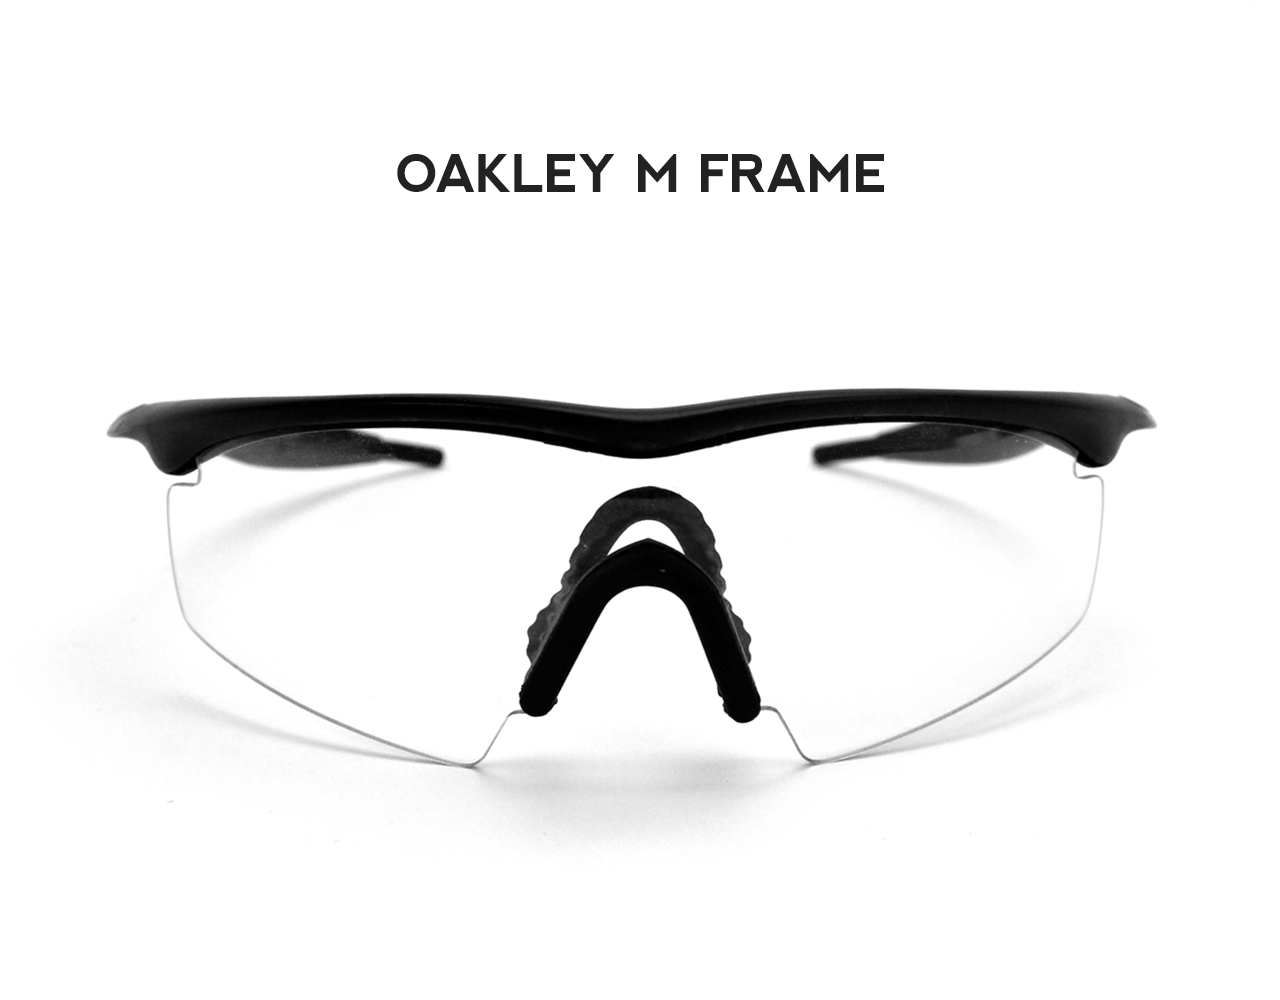 Spinning view of Oakley M Frame Sunglasses with clear lenses